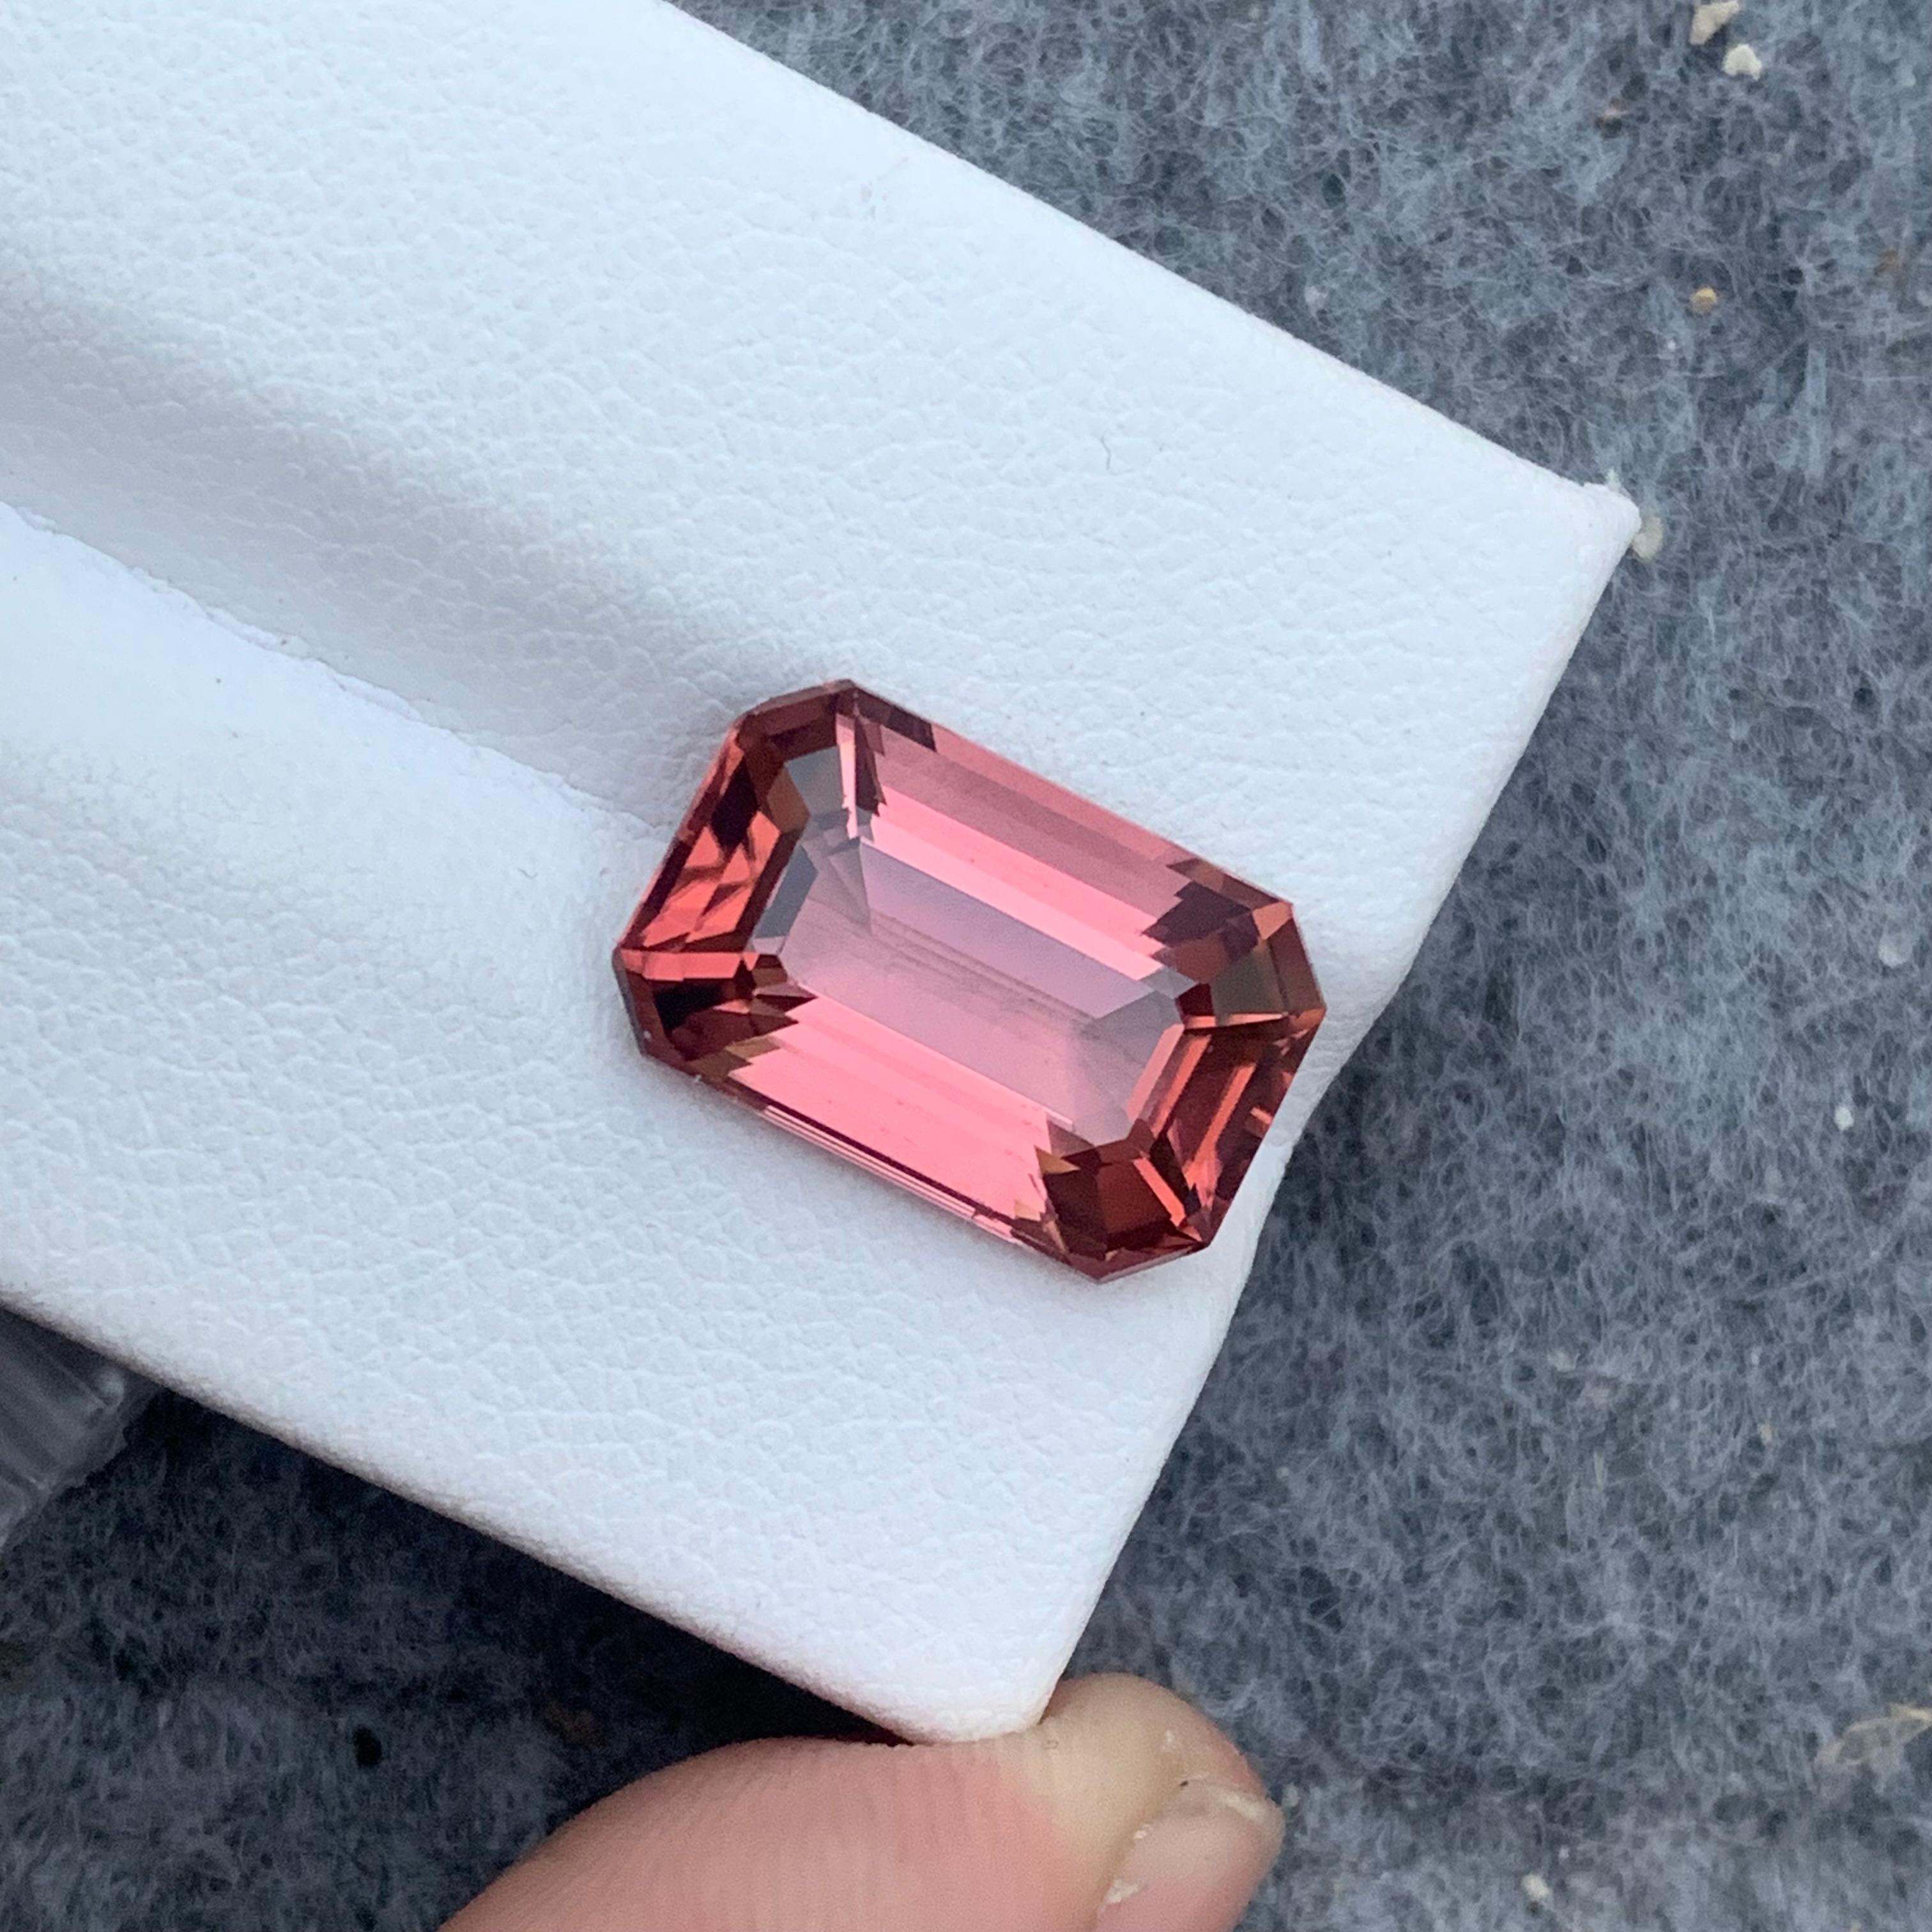 9.0 Carat AAA Quality Loose Soft Pink Tourmaline Emerald Cut From Afghanistan 8